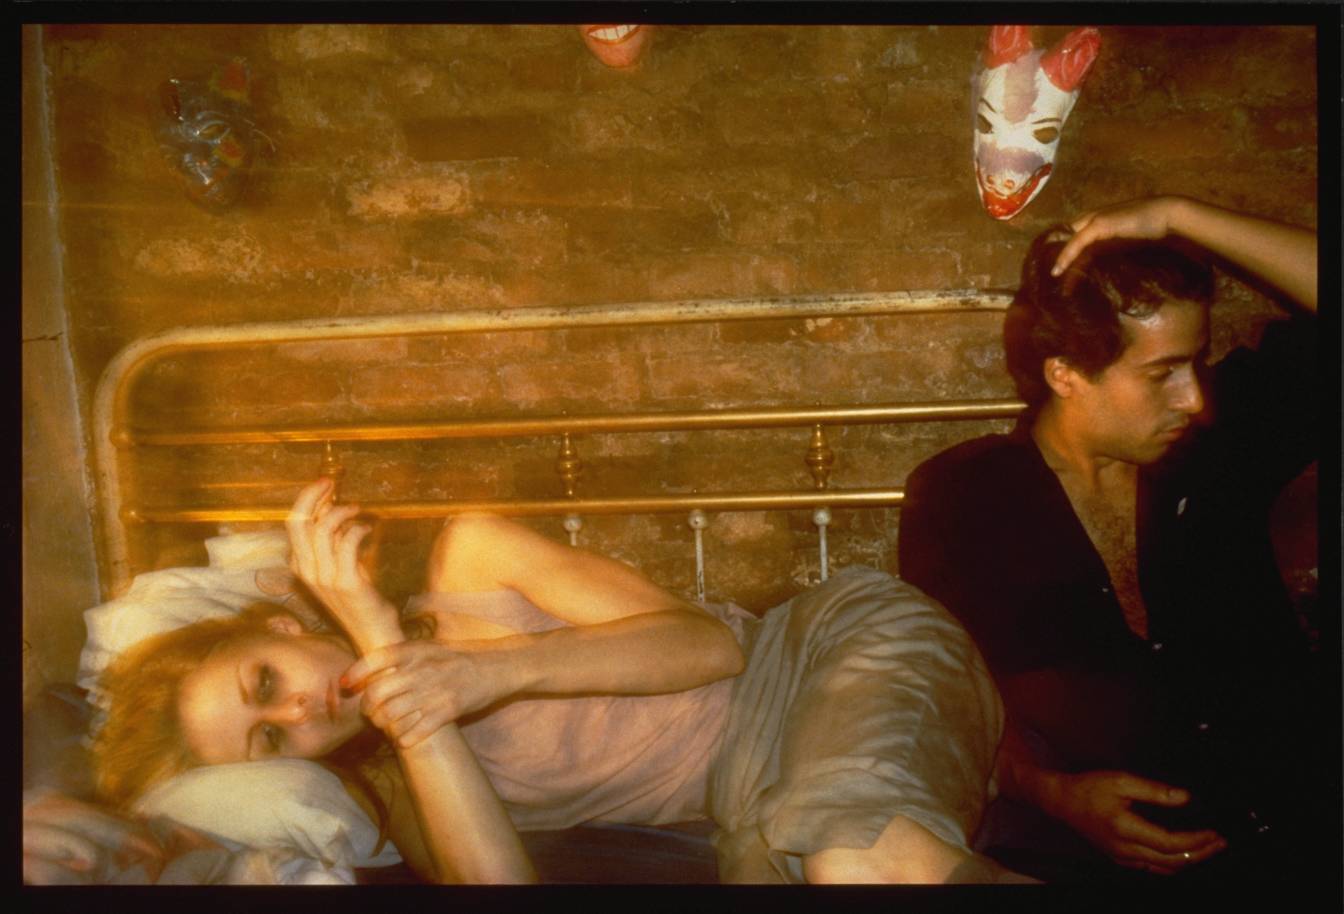 Greer and Robert on the bed, NYC 1982 by Nan Goldin born 1953